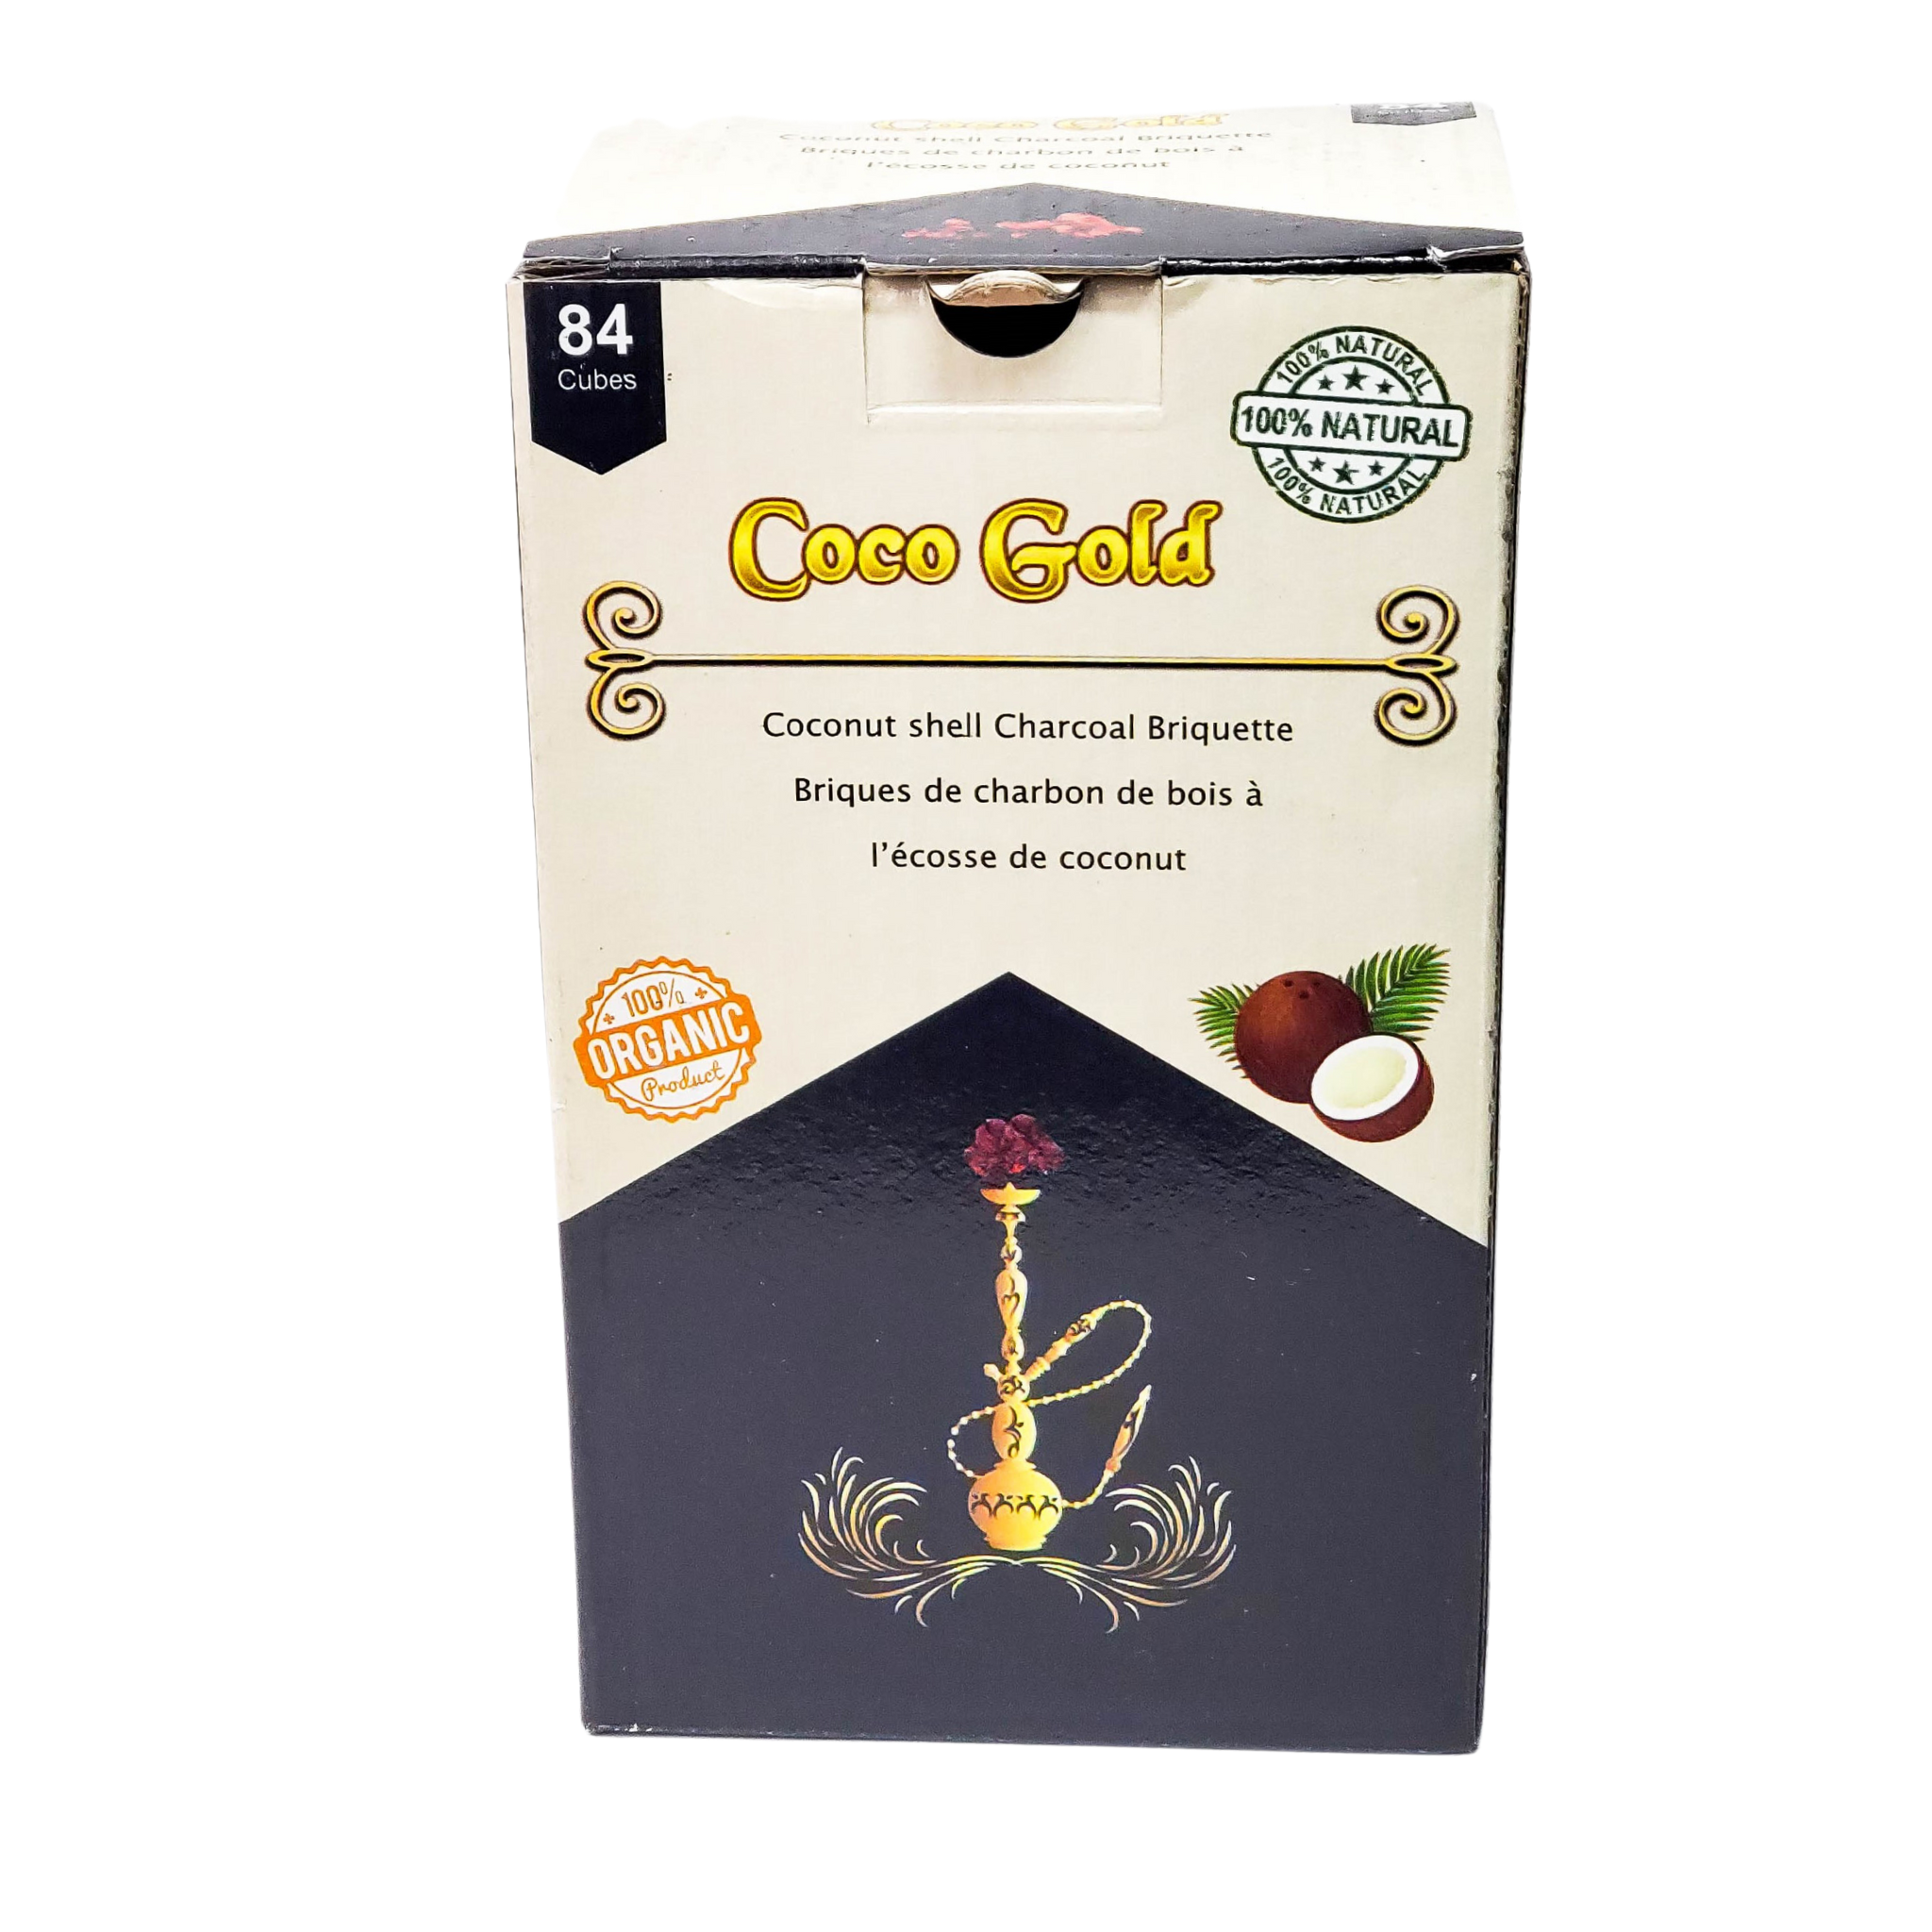 Coco Gold Coconut Shell Carcoal 84 Cubes